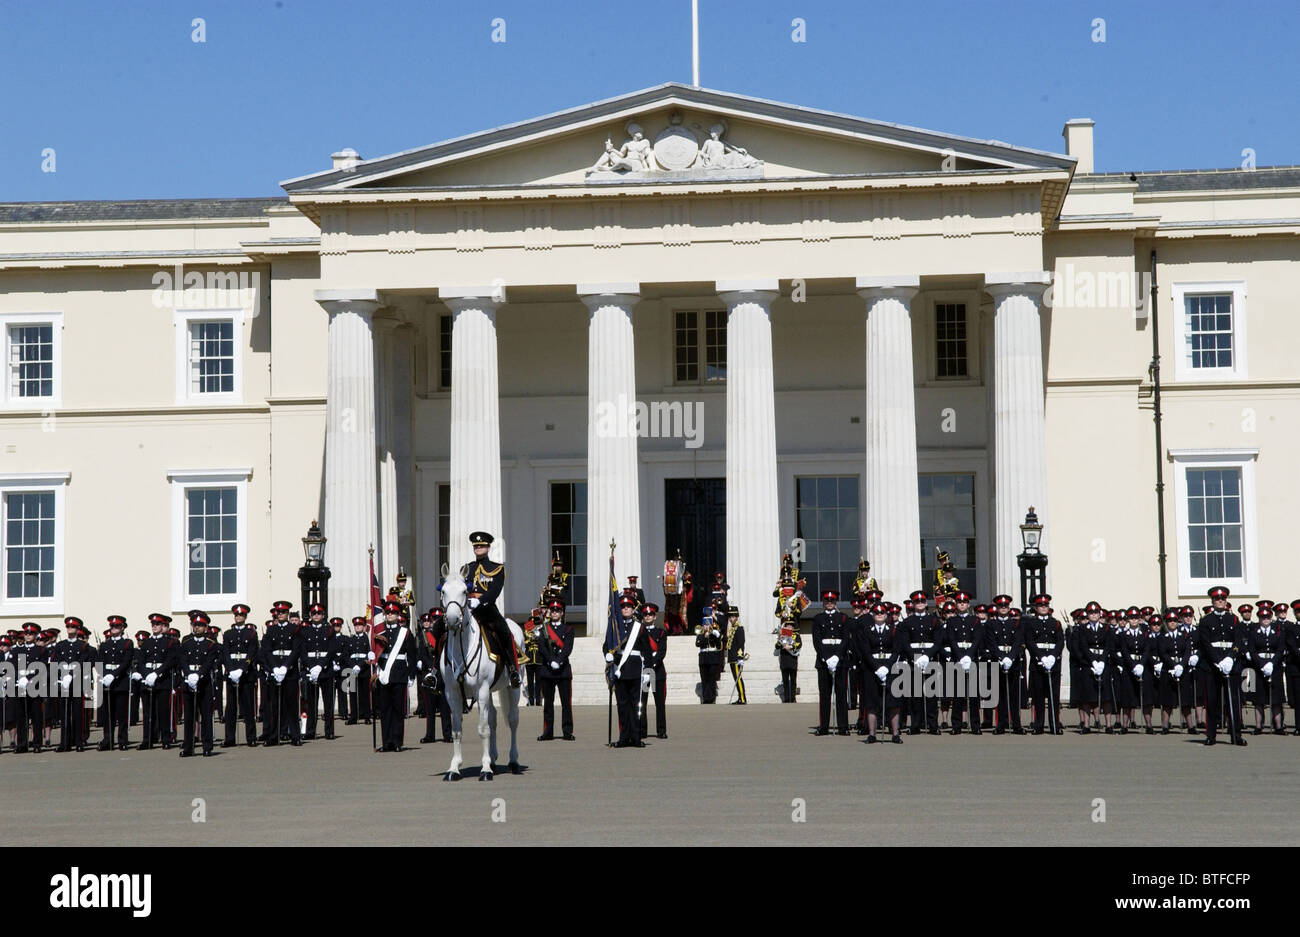 The Colonel leads officer cadets at the Passing Out Parade at Sandhurst Royal Military Academy, Surrey, UK Stock Photo